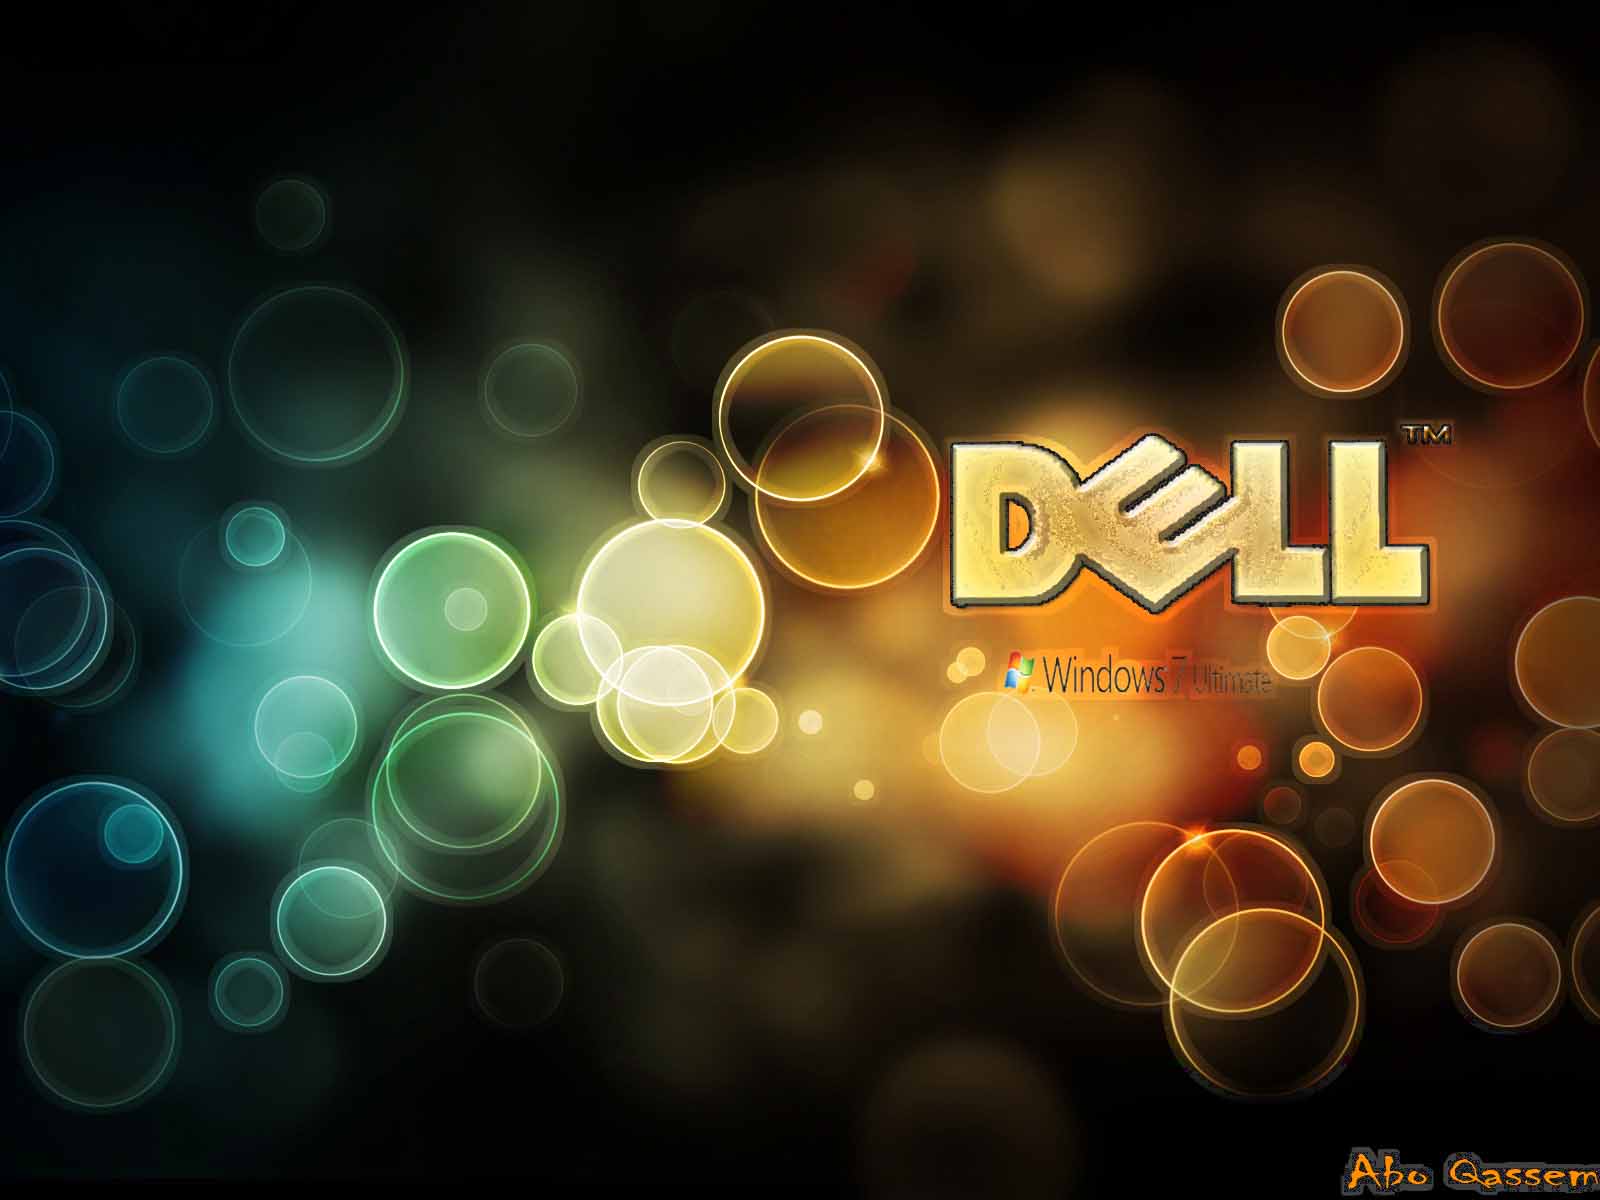 Wallpapers Sky Laptop Dell Wallpapers